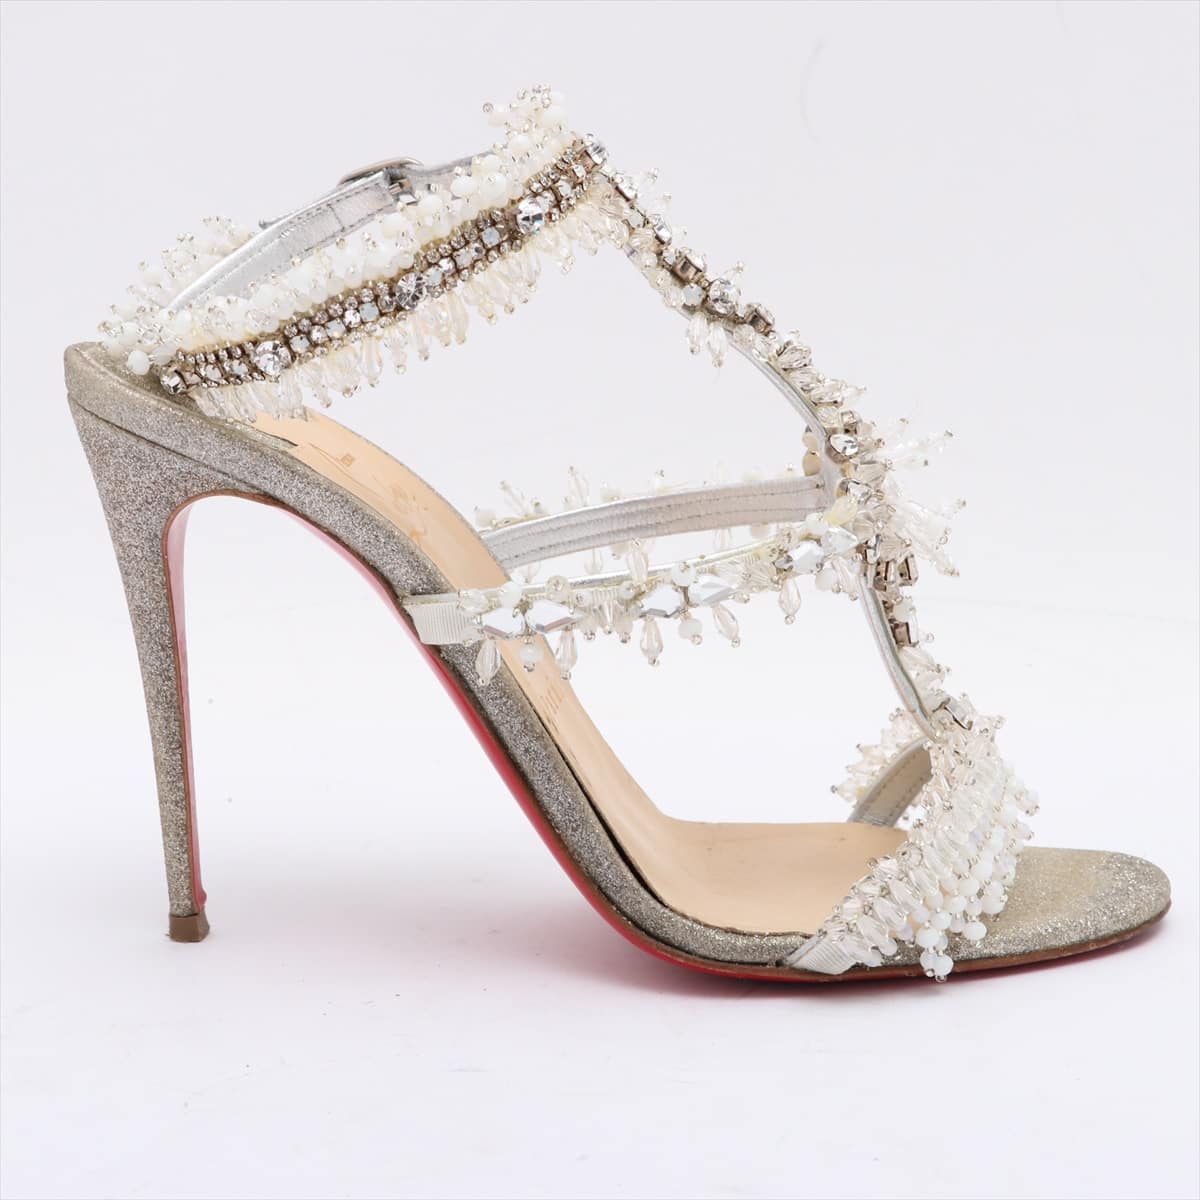 Christian Louboutin Glitter Sandals 37.5 Ladies' Silver Bijou There is discoloration on the upper